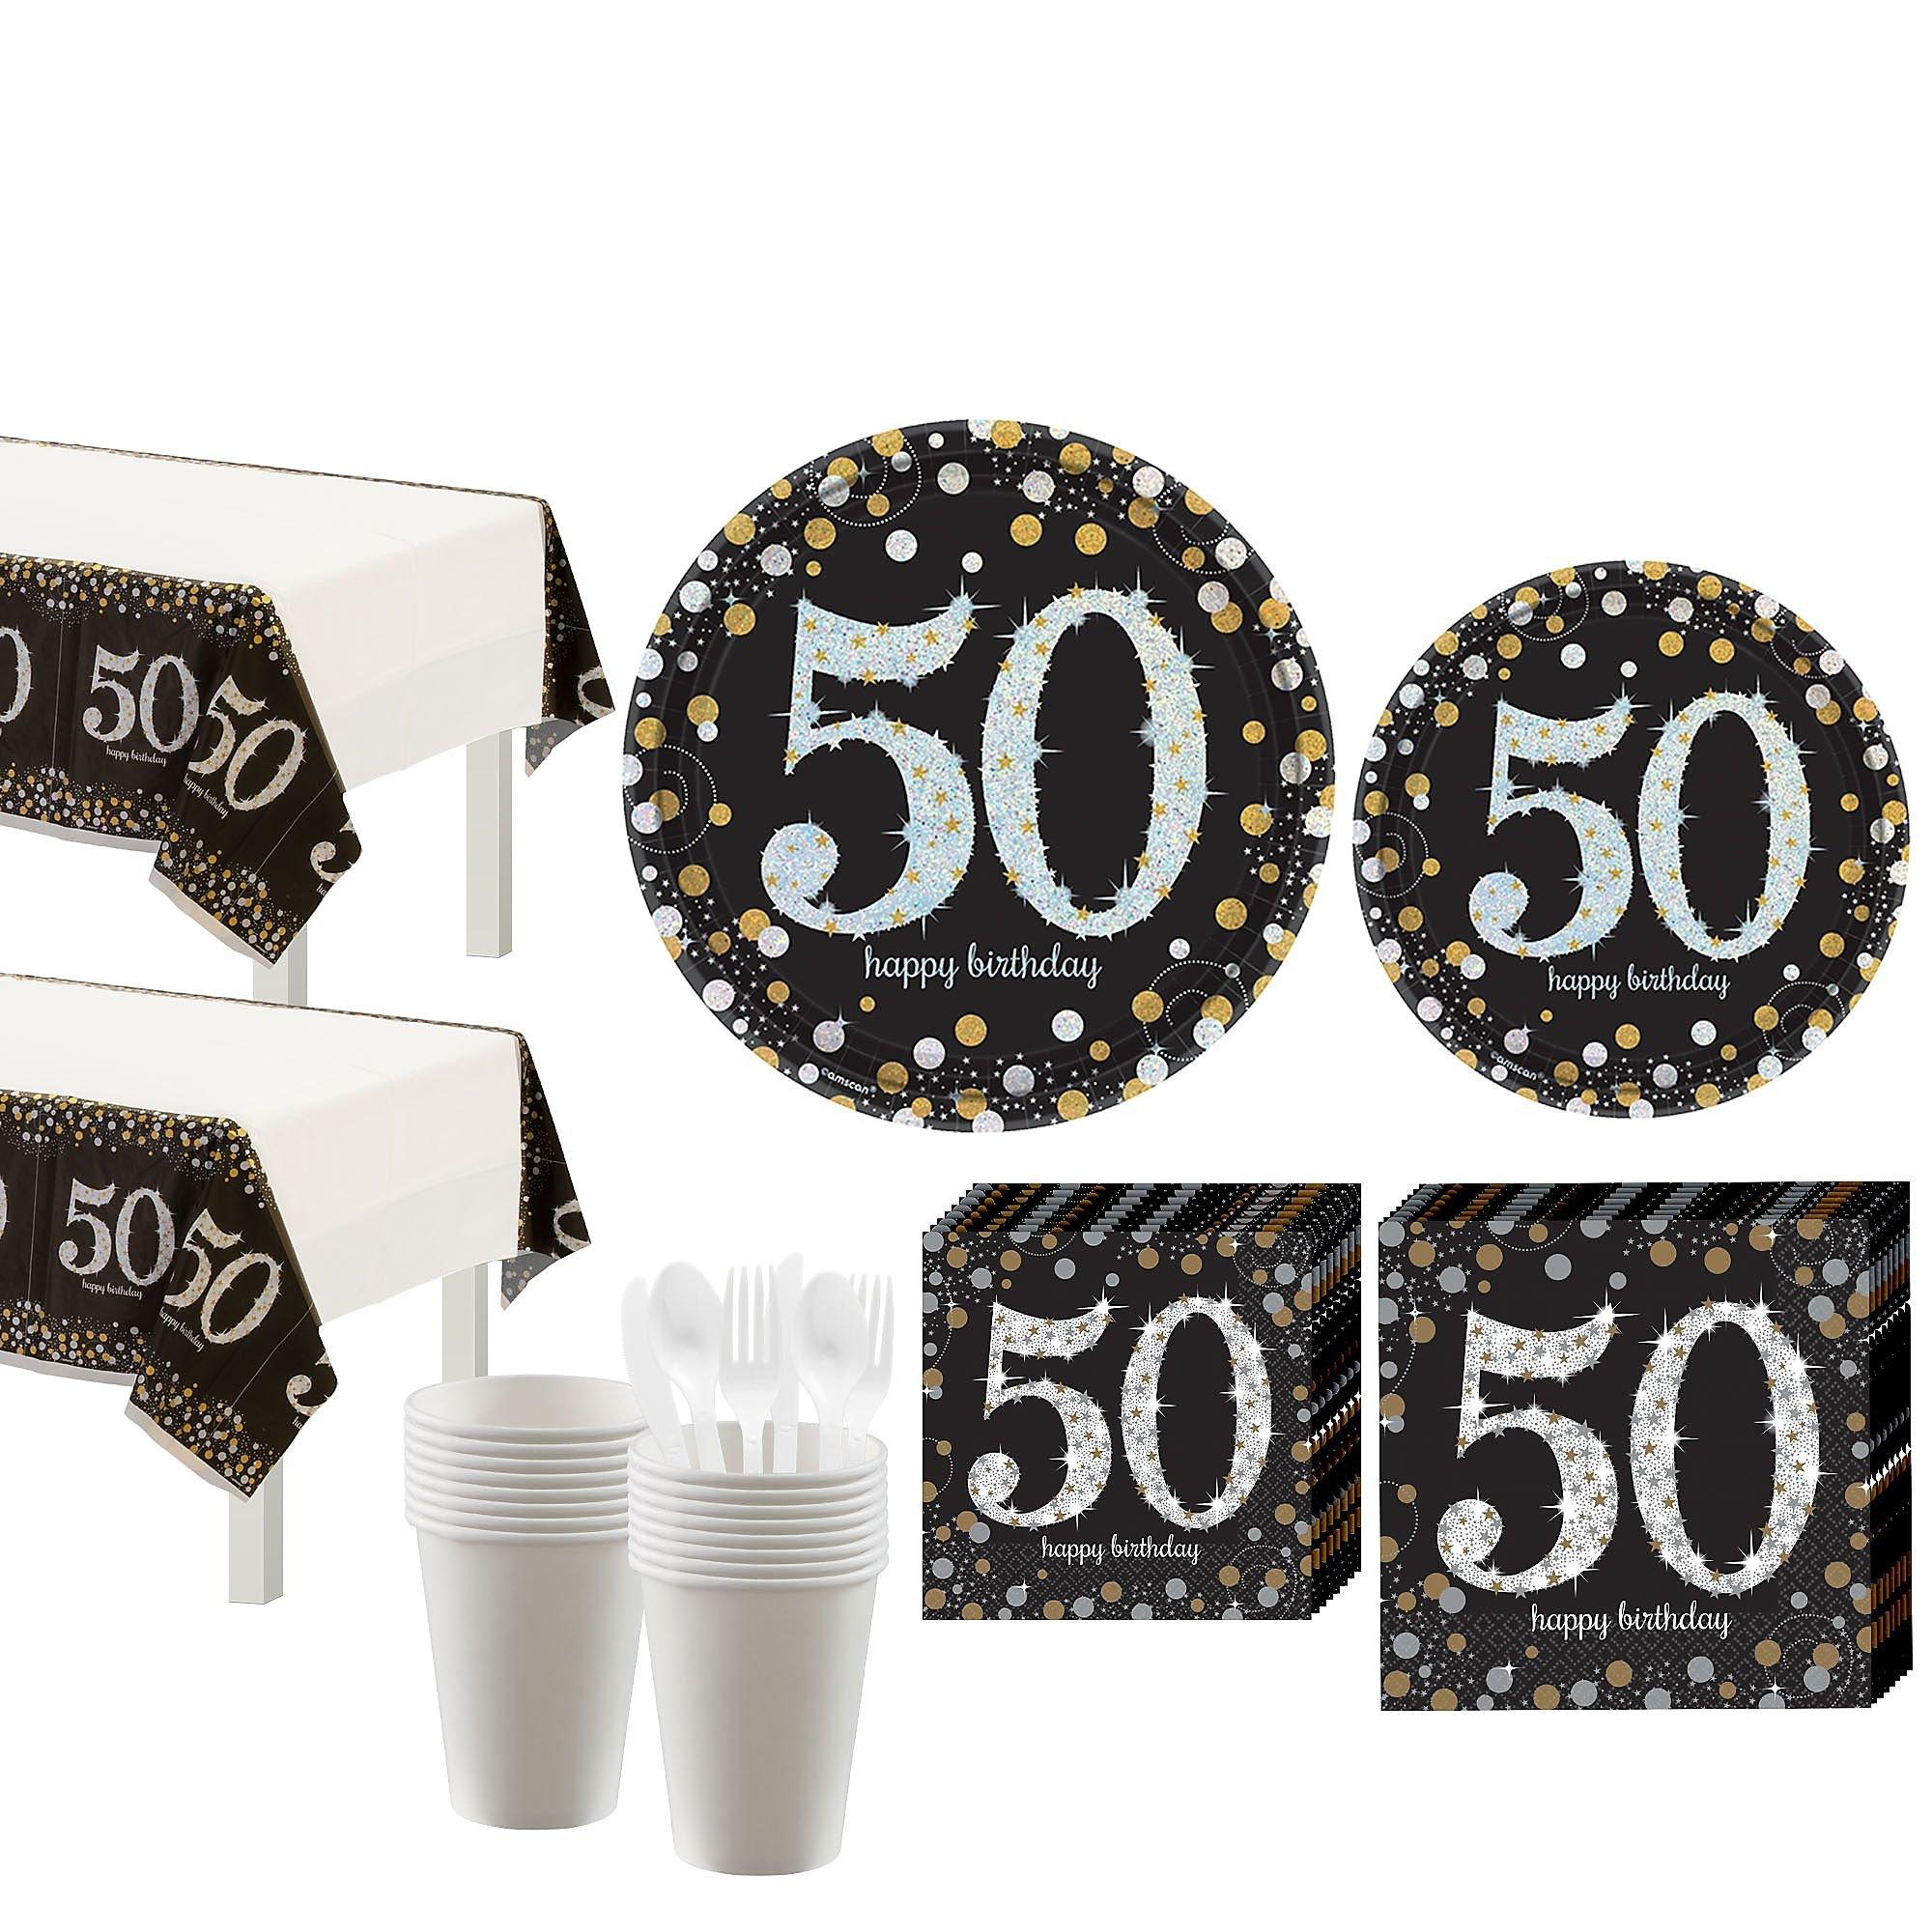 Sparkling Celebration 50th Birthday Party Kit for 16 Guests | Party City